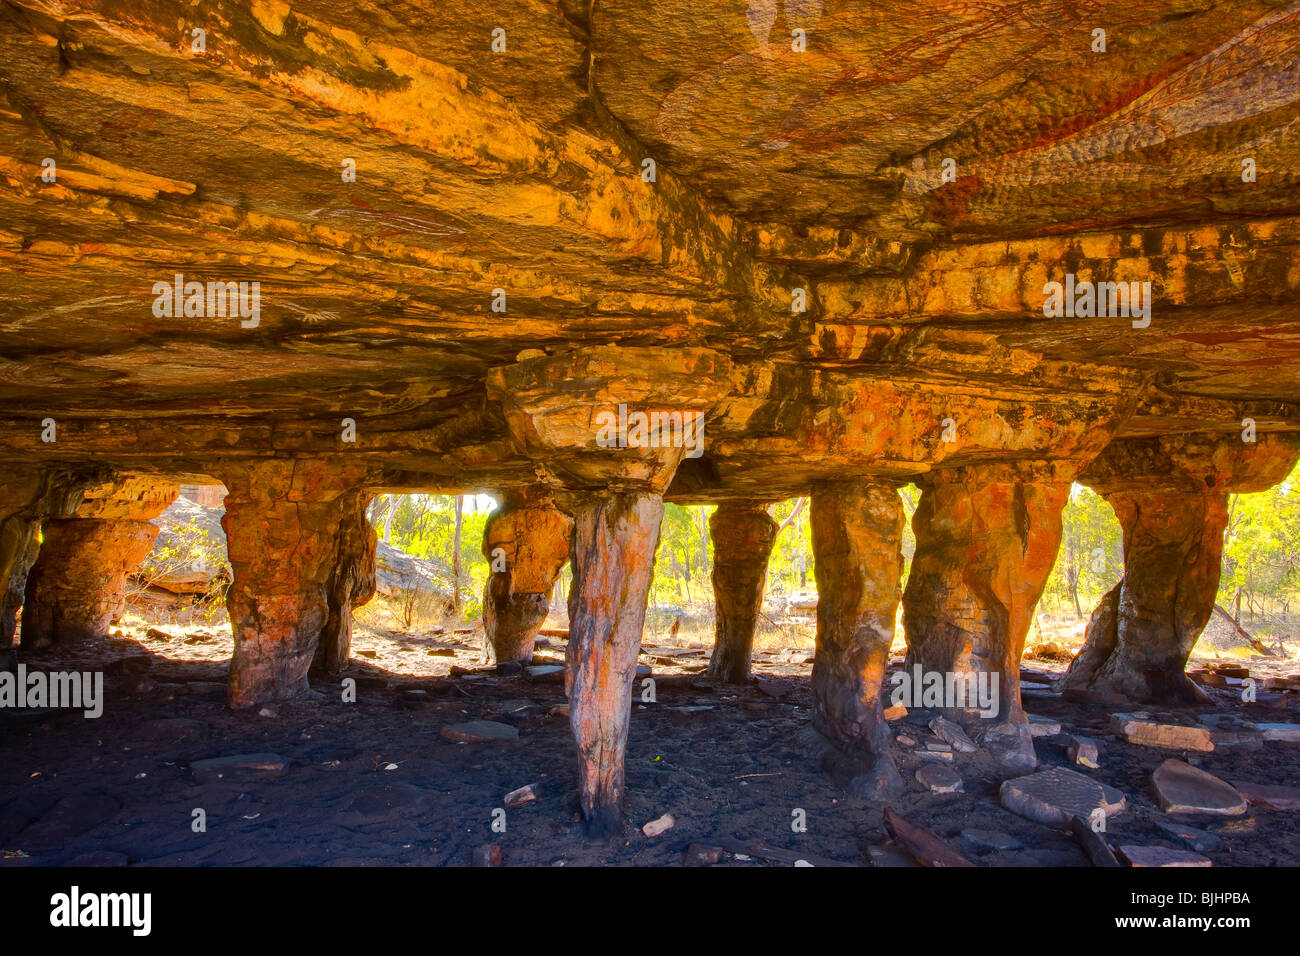 Inside a cave arch, Outback Australia, Location secret to protect geology, One of the world's largest cave arches, Jawoyn Land, Stock Photo